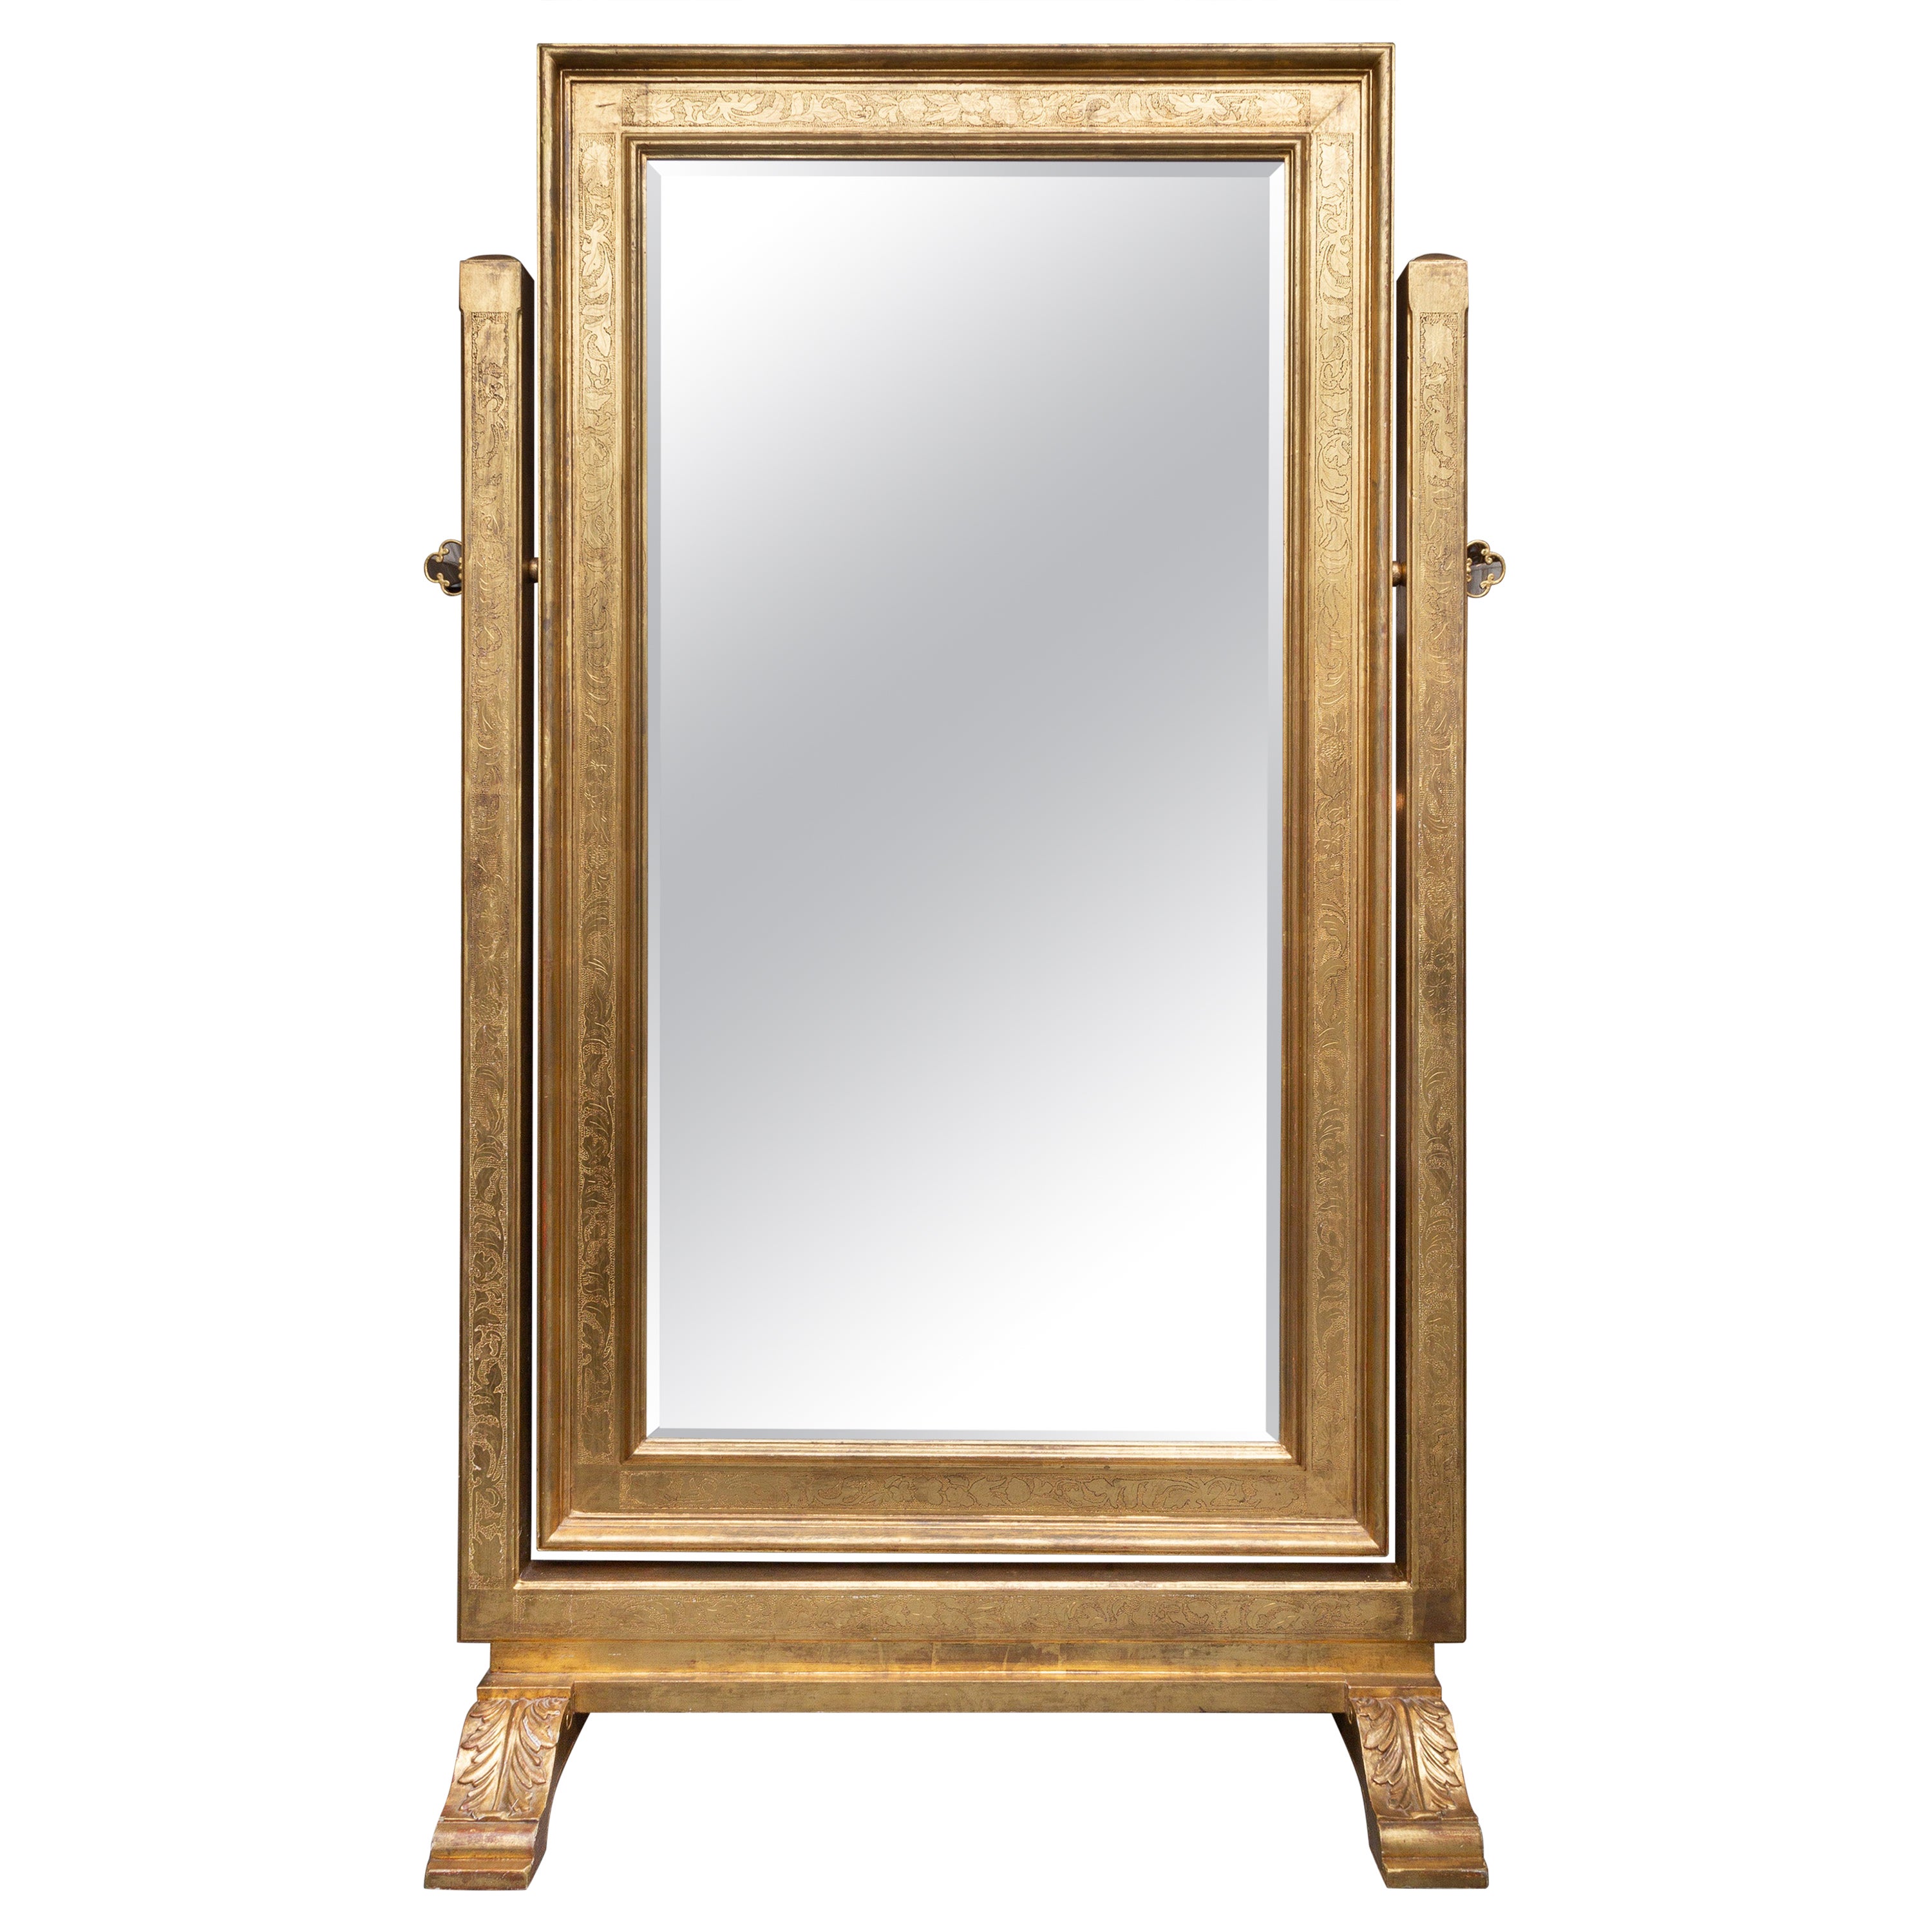 Brand New 59''H Vintage Style Classic WOOD CHEVAL MIRROR in OAK Color ASDI 